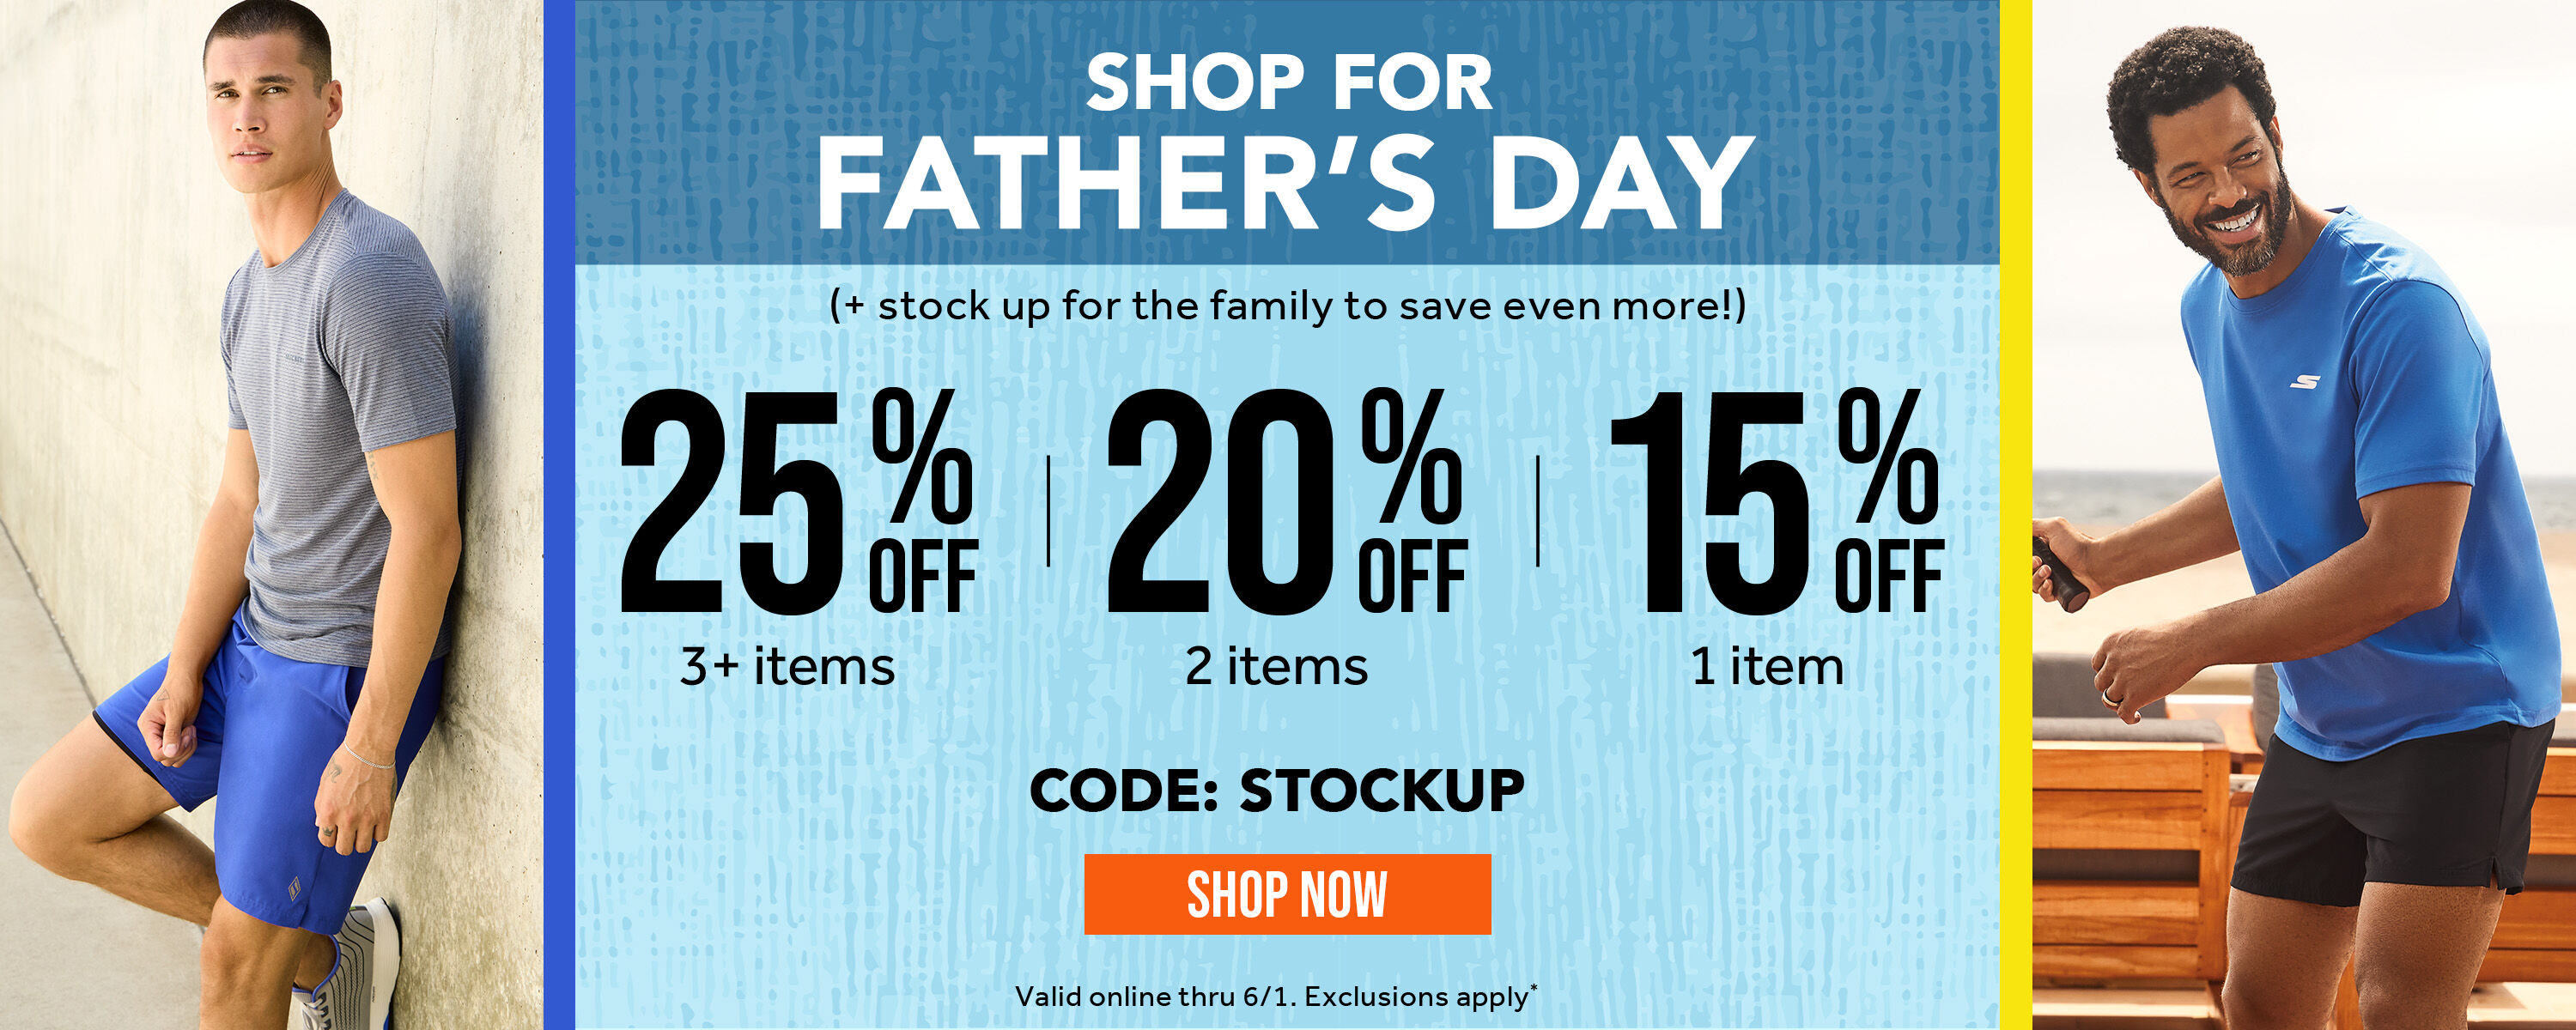 15% off 1 item, 20% off 2 items, 25% off 3+ items